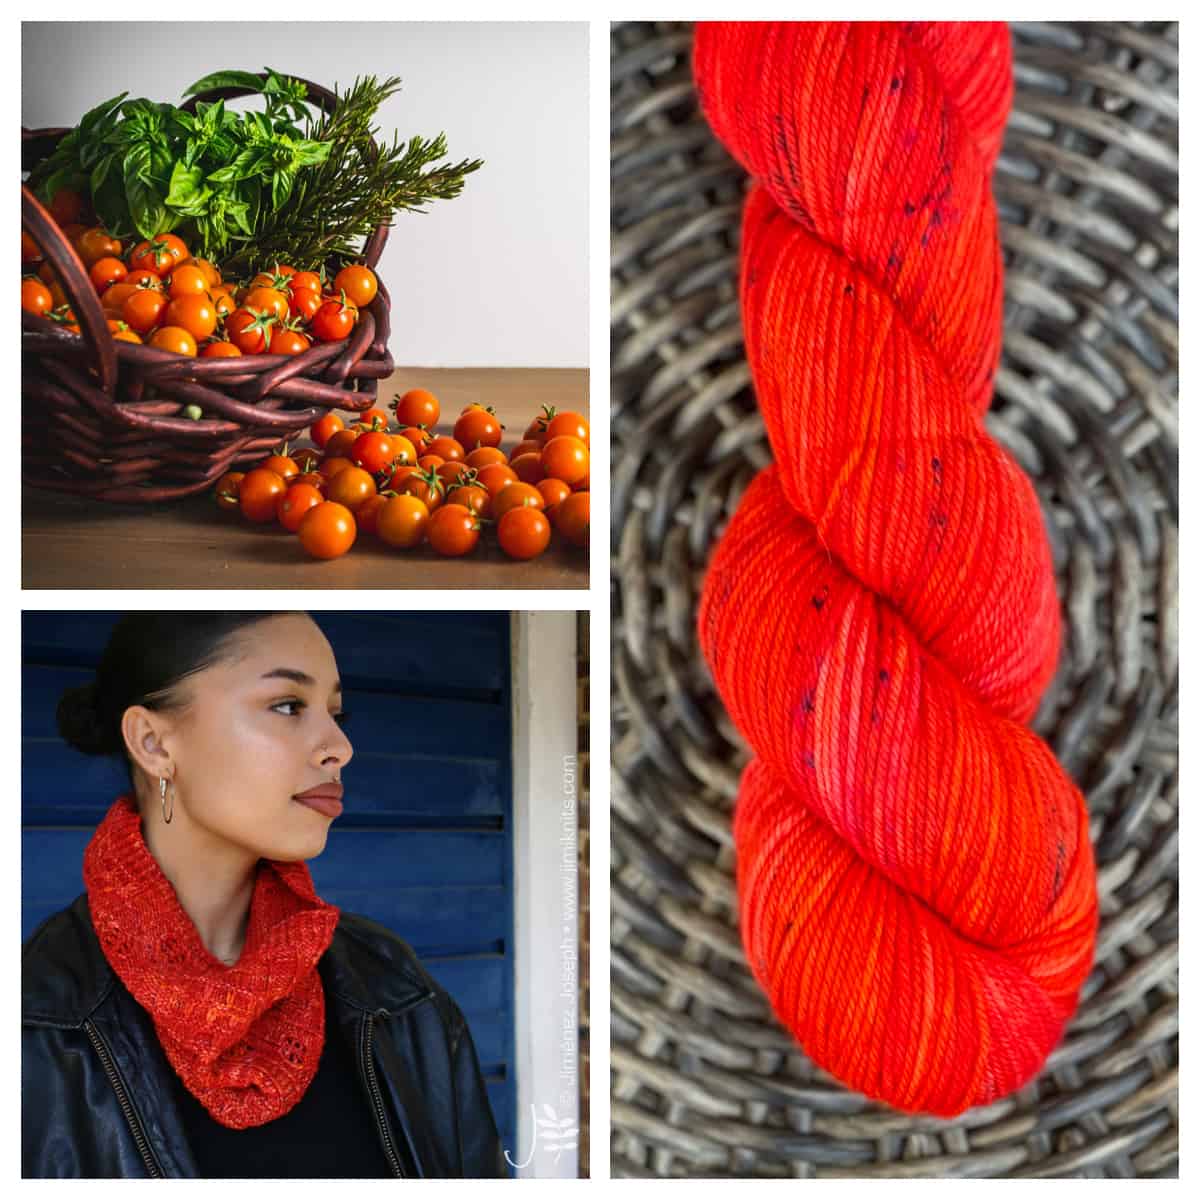 A basket of tomatoes, a skein of bright red-orange yarn and an olive-skinned woman wearing a red textured cowl over a black leather jacket.